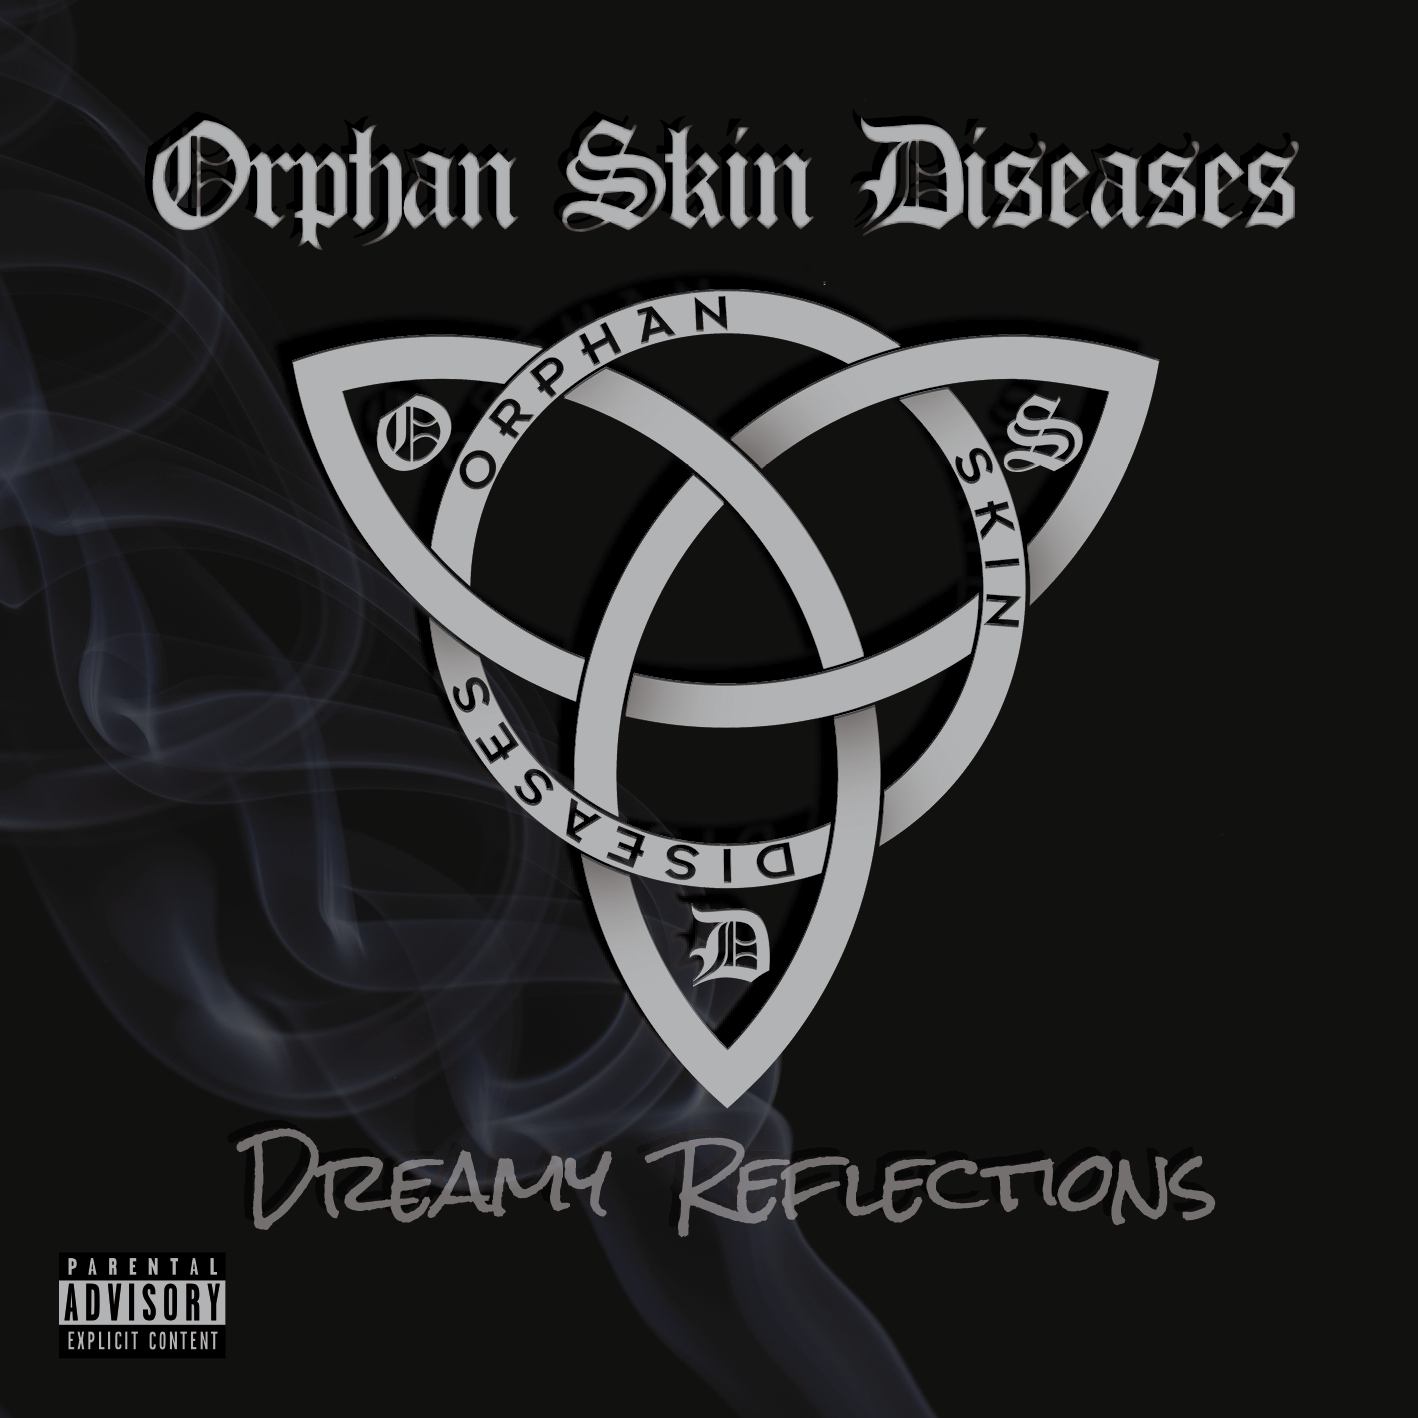 Osd dreamyreflections cover